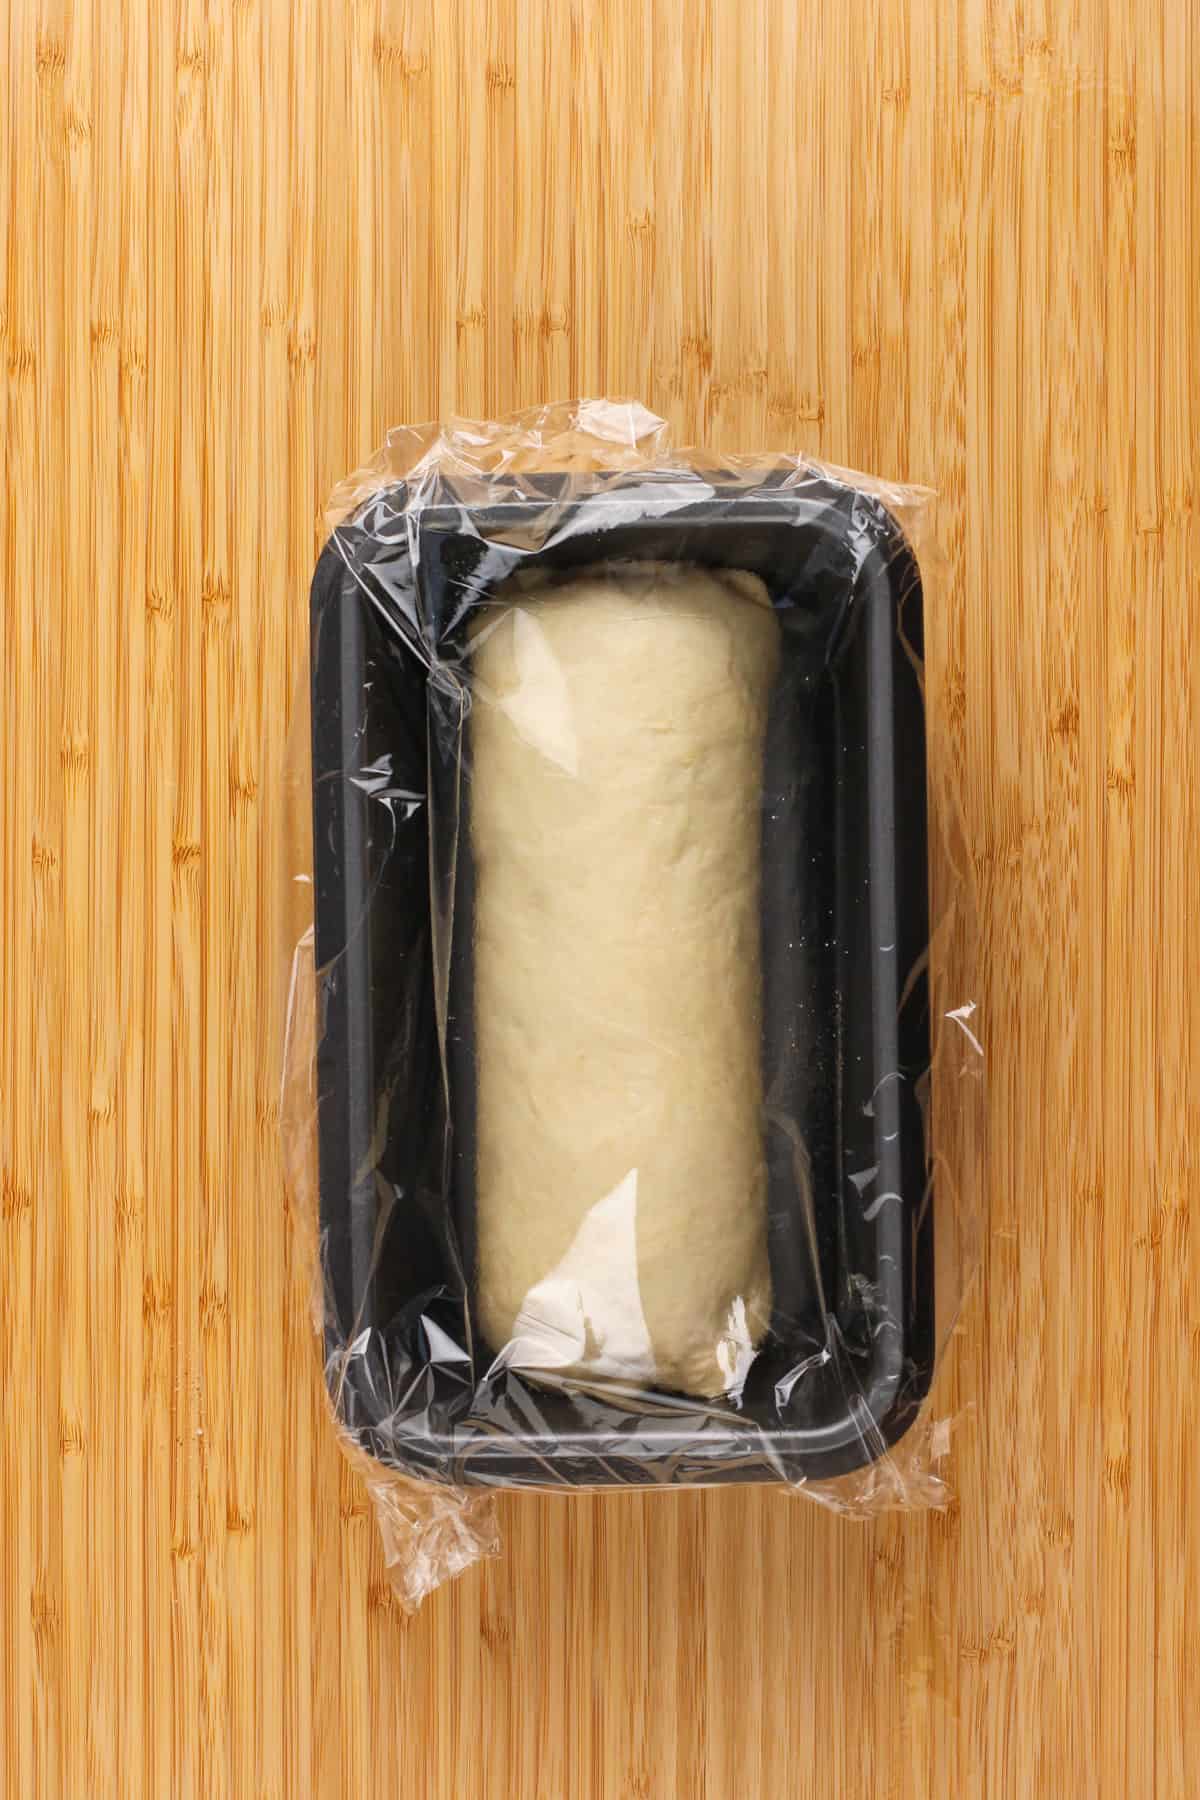 Assembled loaf of cinnamon swirl bread in a loaf pan covered with plastic wrap, ready for proofing.